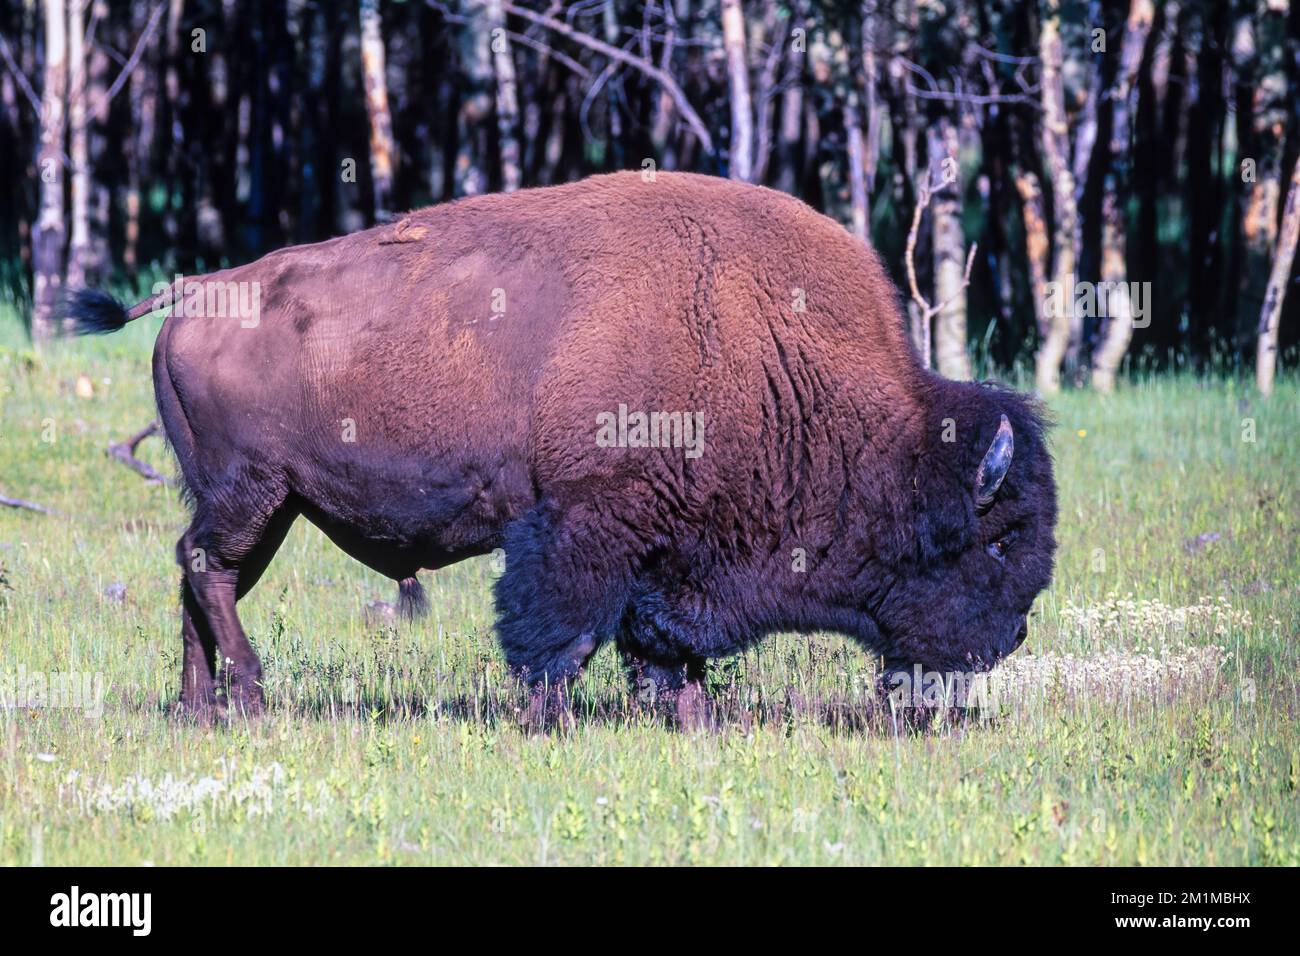 Bison on a meadow by the forest Stock Photo